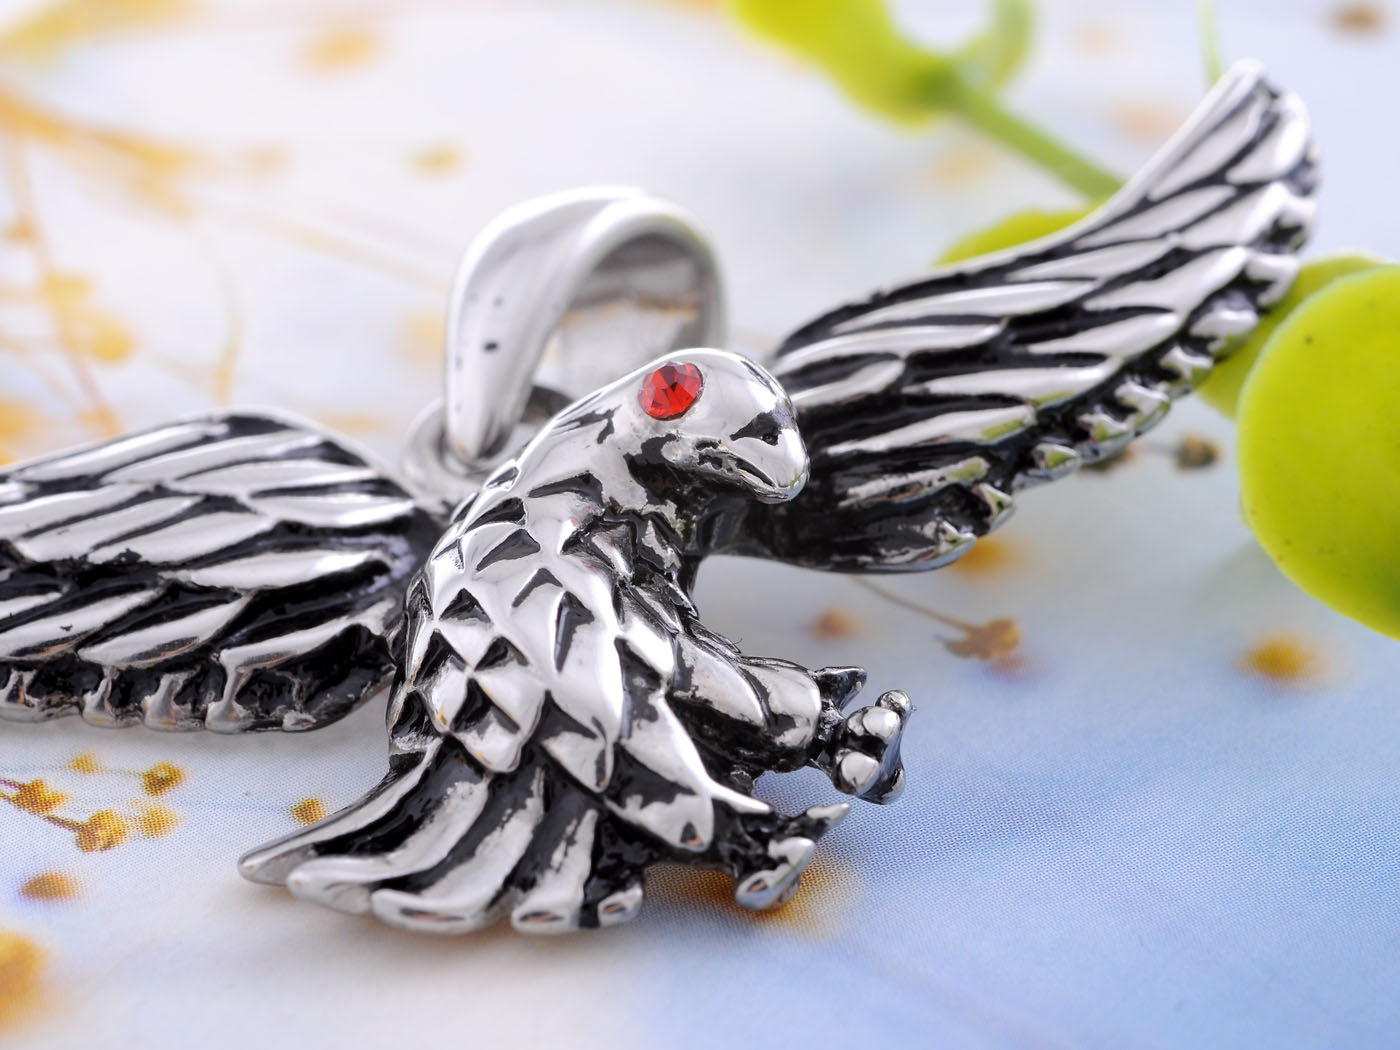 Stainless Steel Flying Eagle Red Eye Necklace Pendant